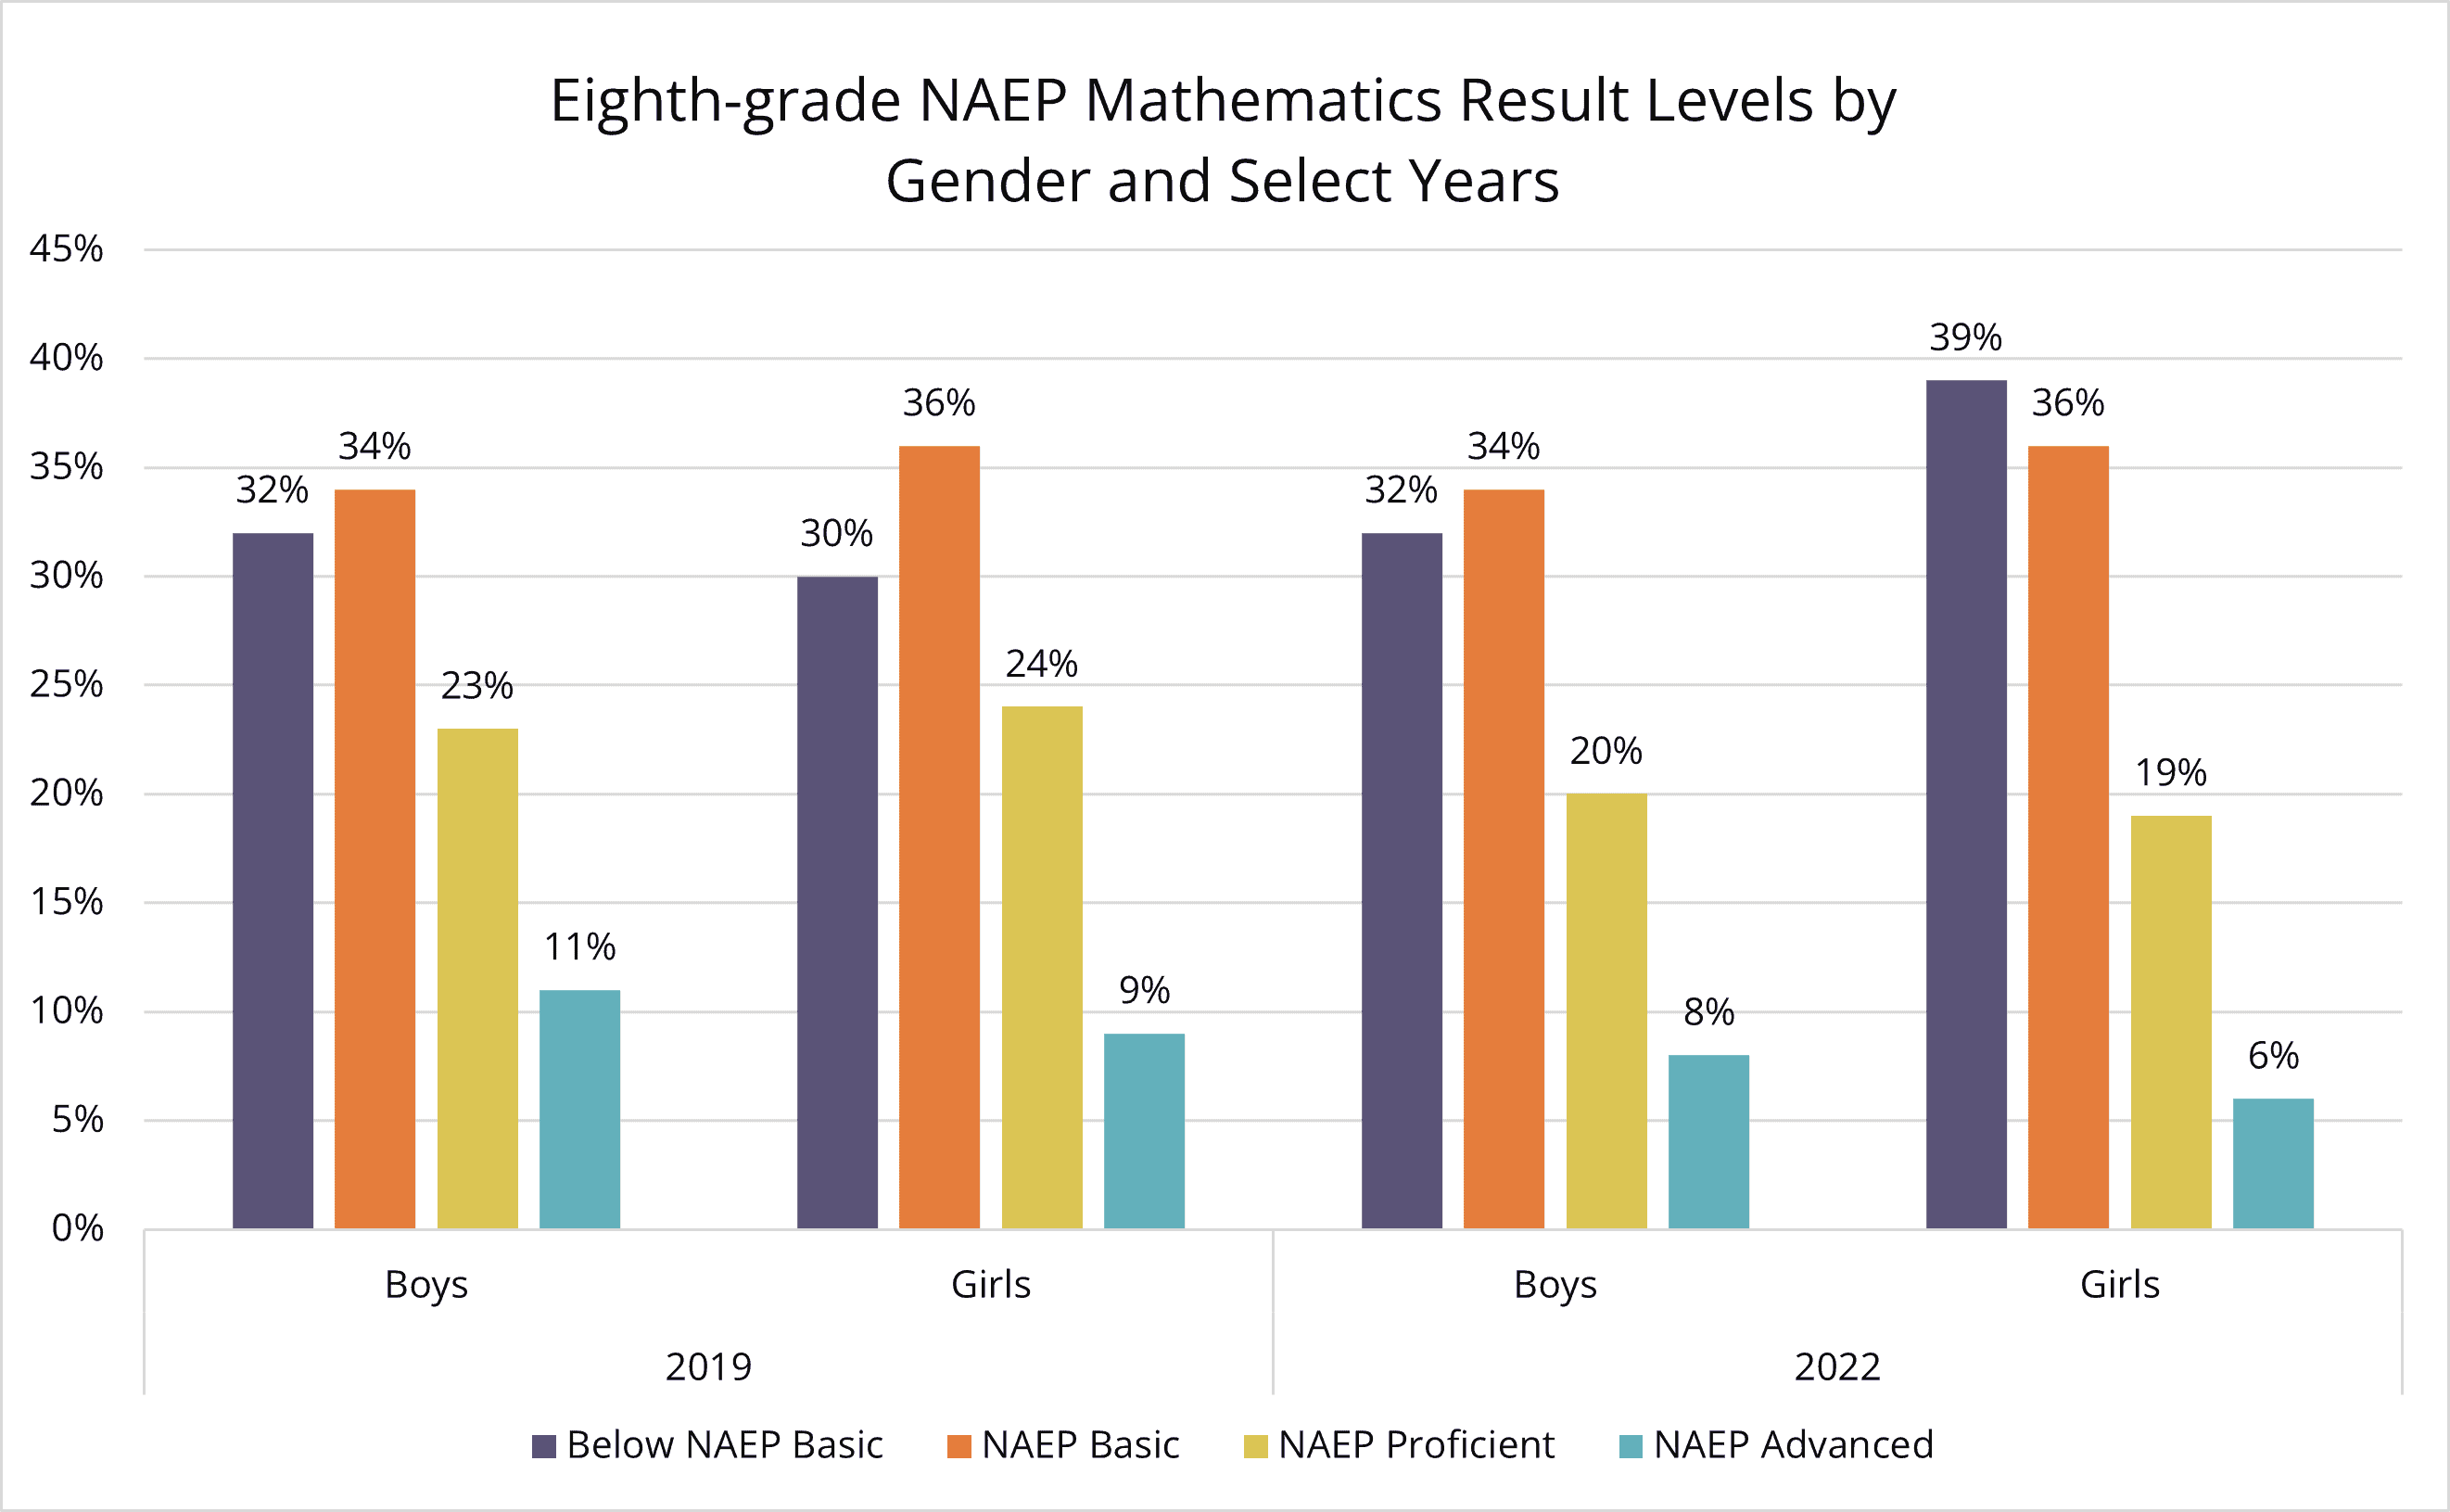 Bar graph representing the different academic preparation in mathematics base on NAEP math results by gender.